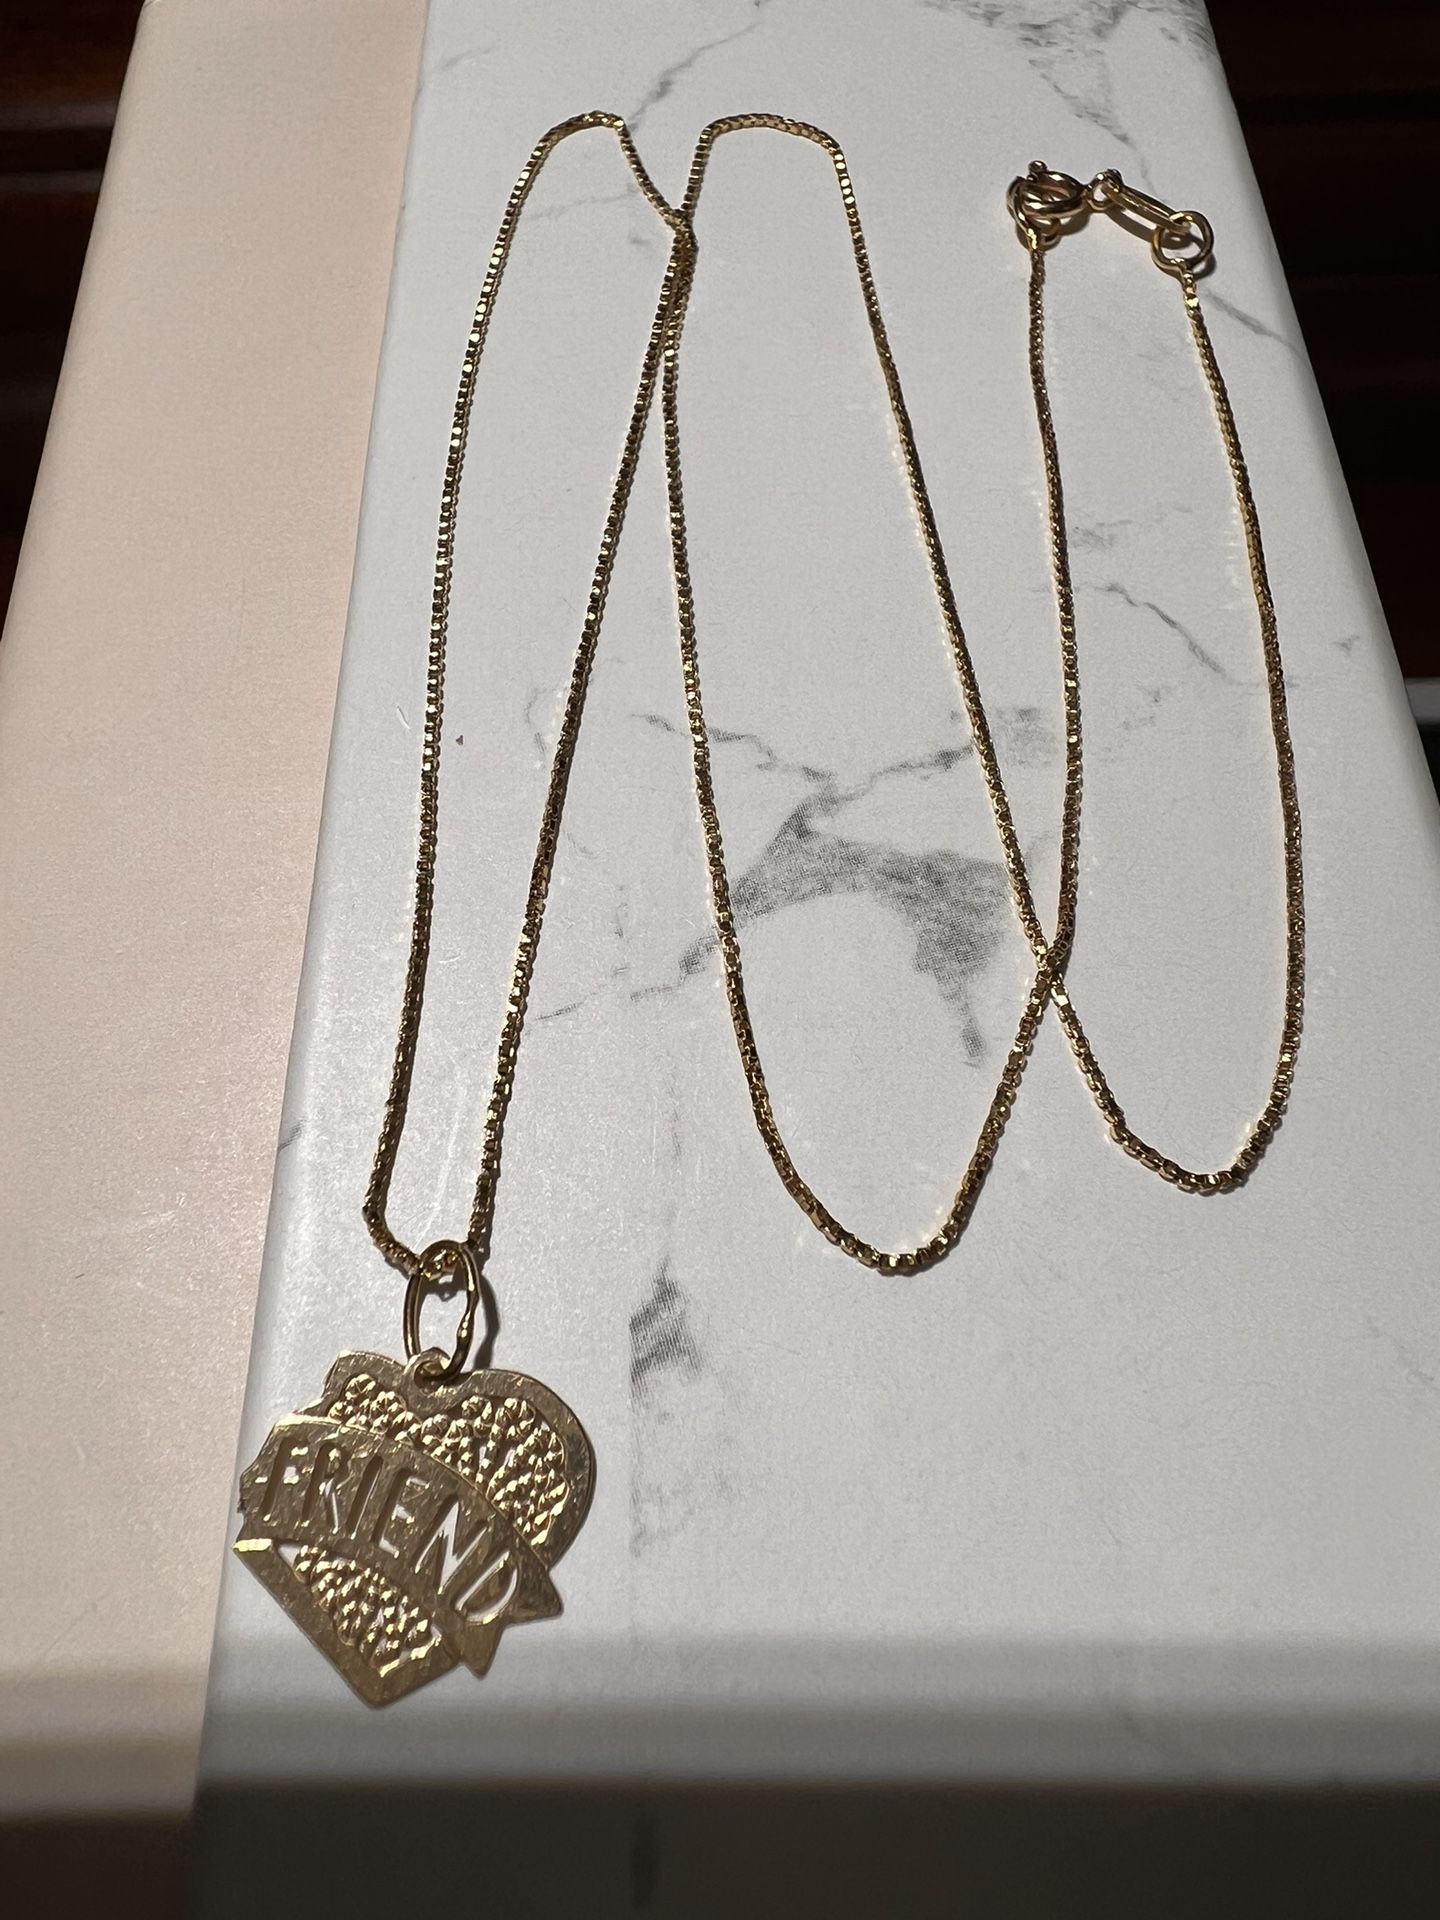 14K YELLOW GOLD NECKLACE WITH “FRIEND” BANNER HEART CHARM 